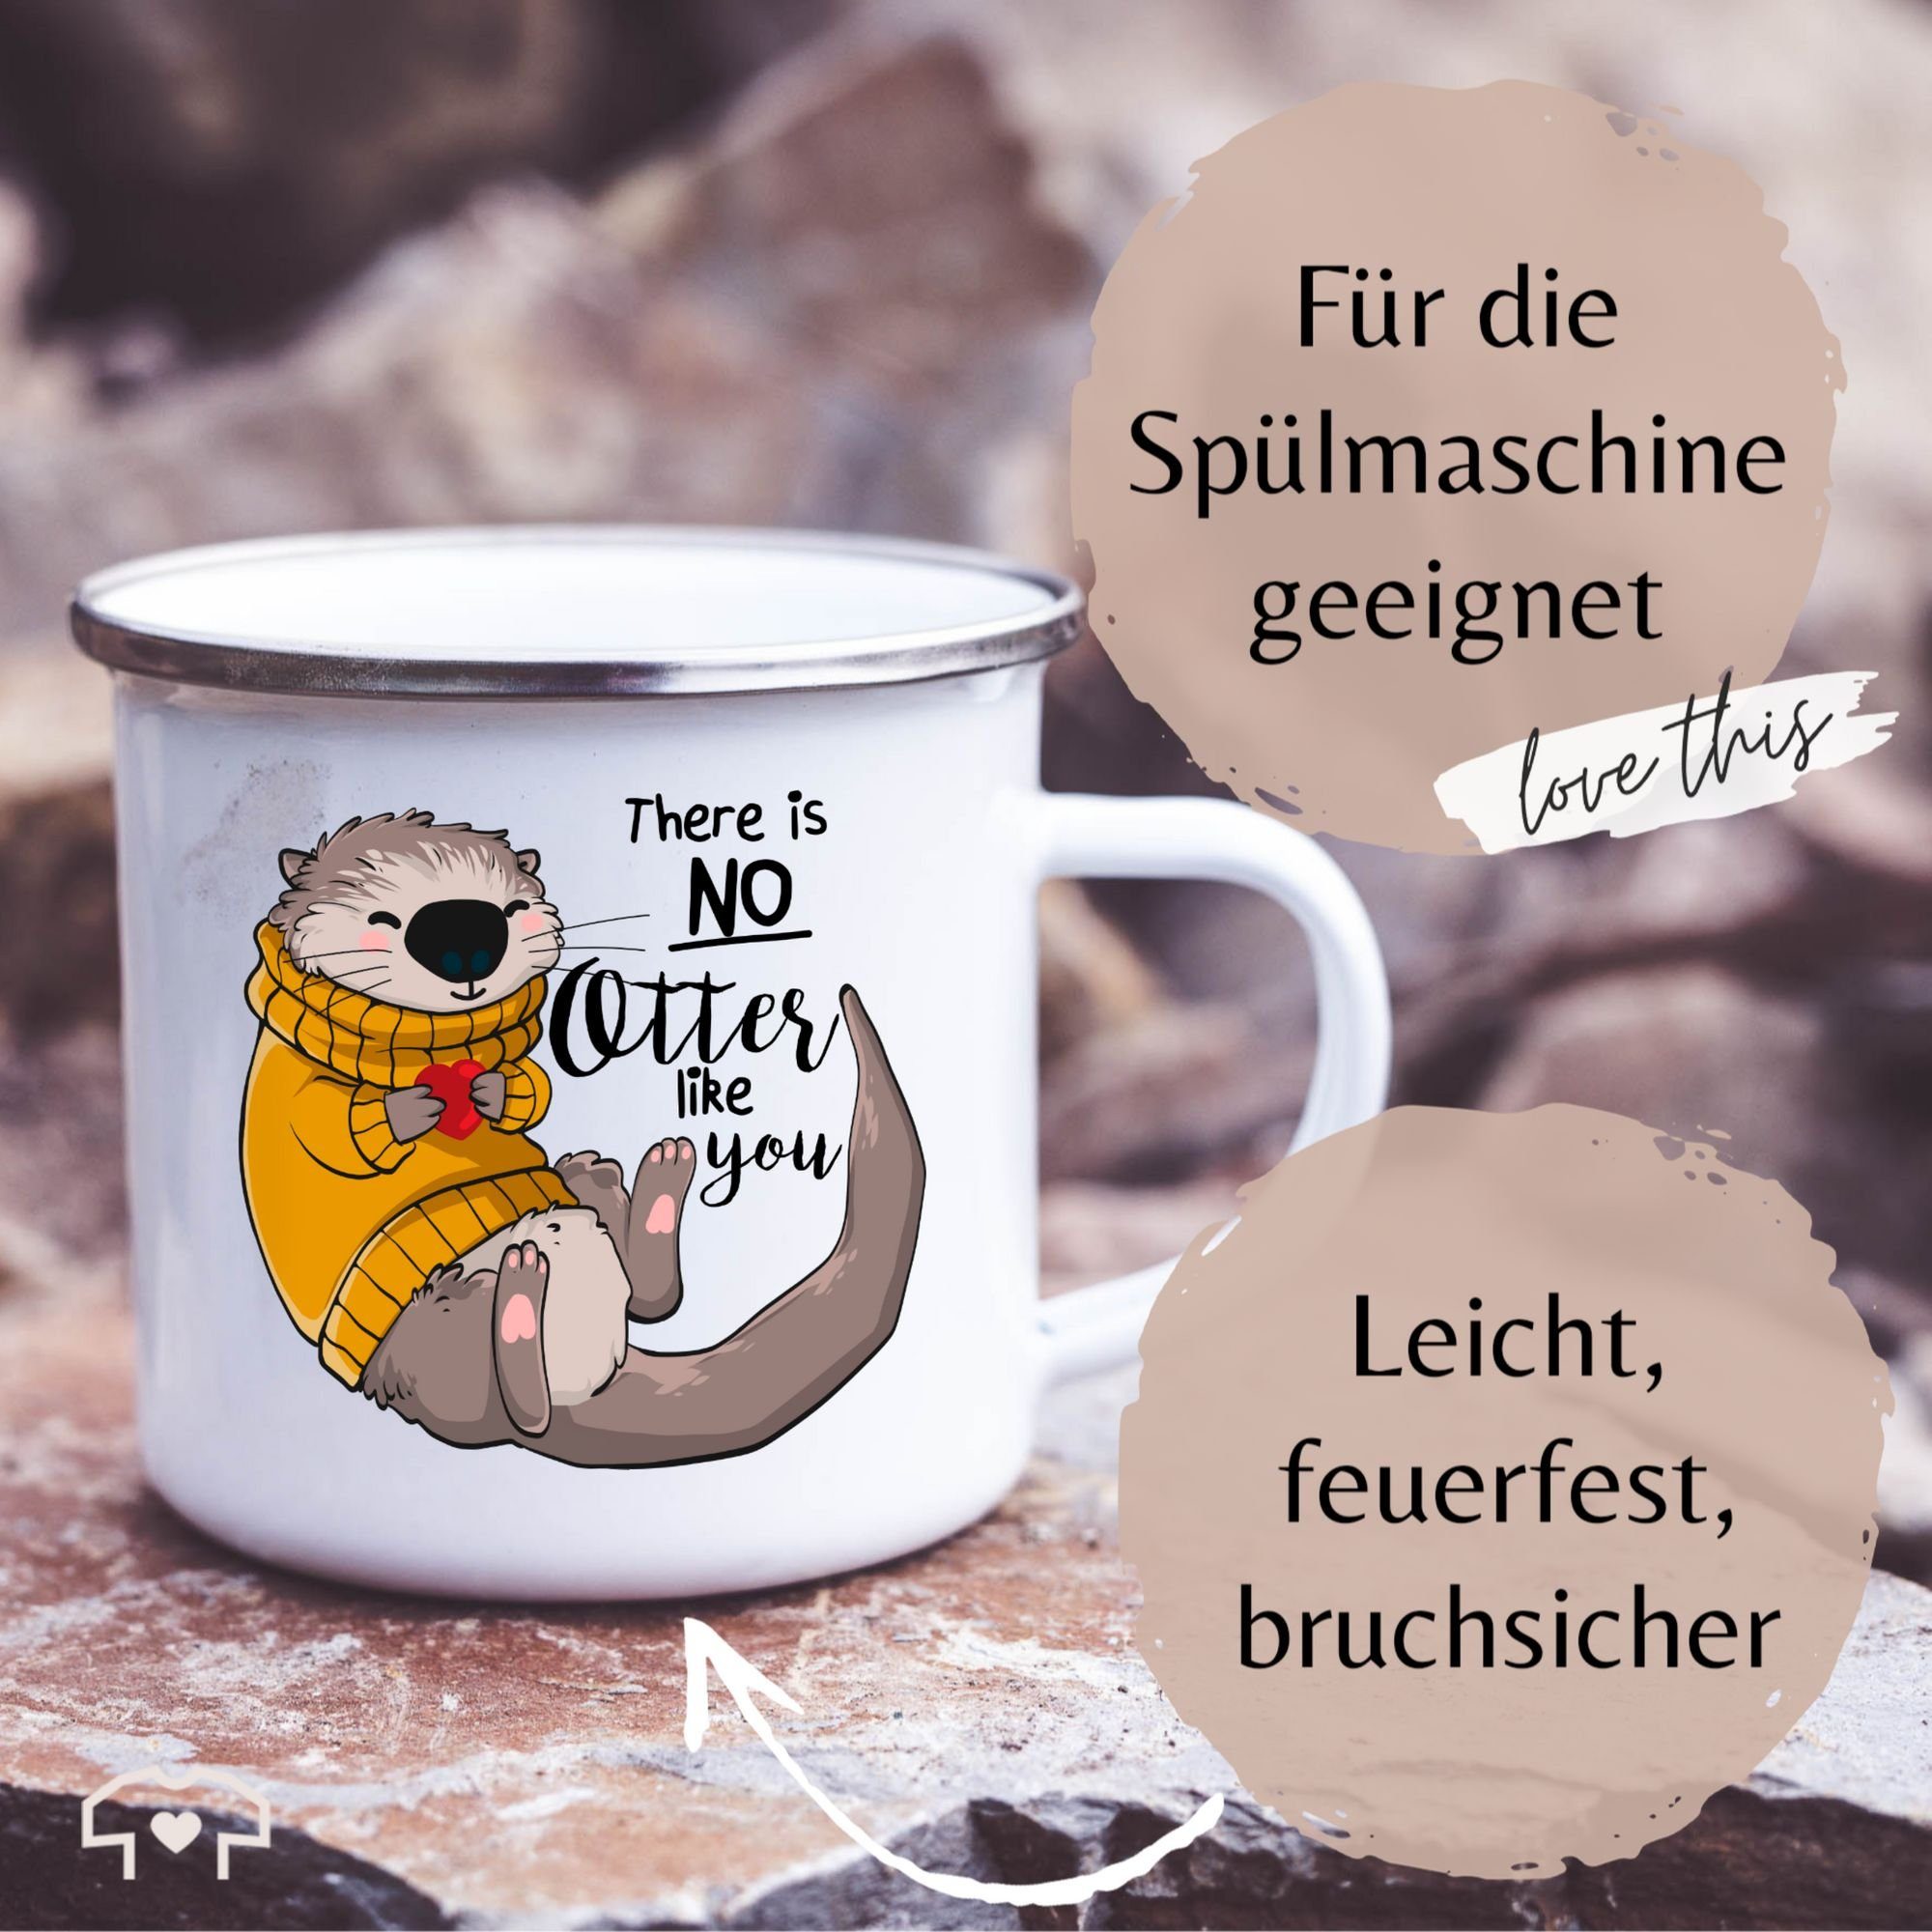 Silber you, Shirtracer is Sprüche Otter Statement Stahlblech, There 3 no Tasse like Weiß